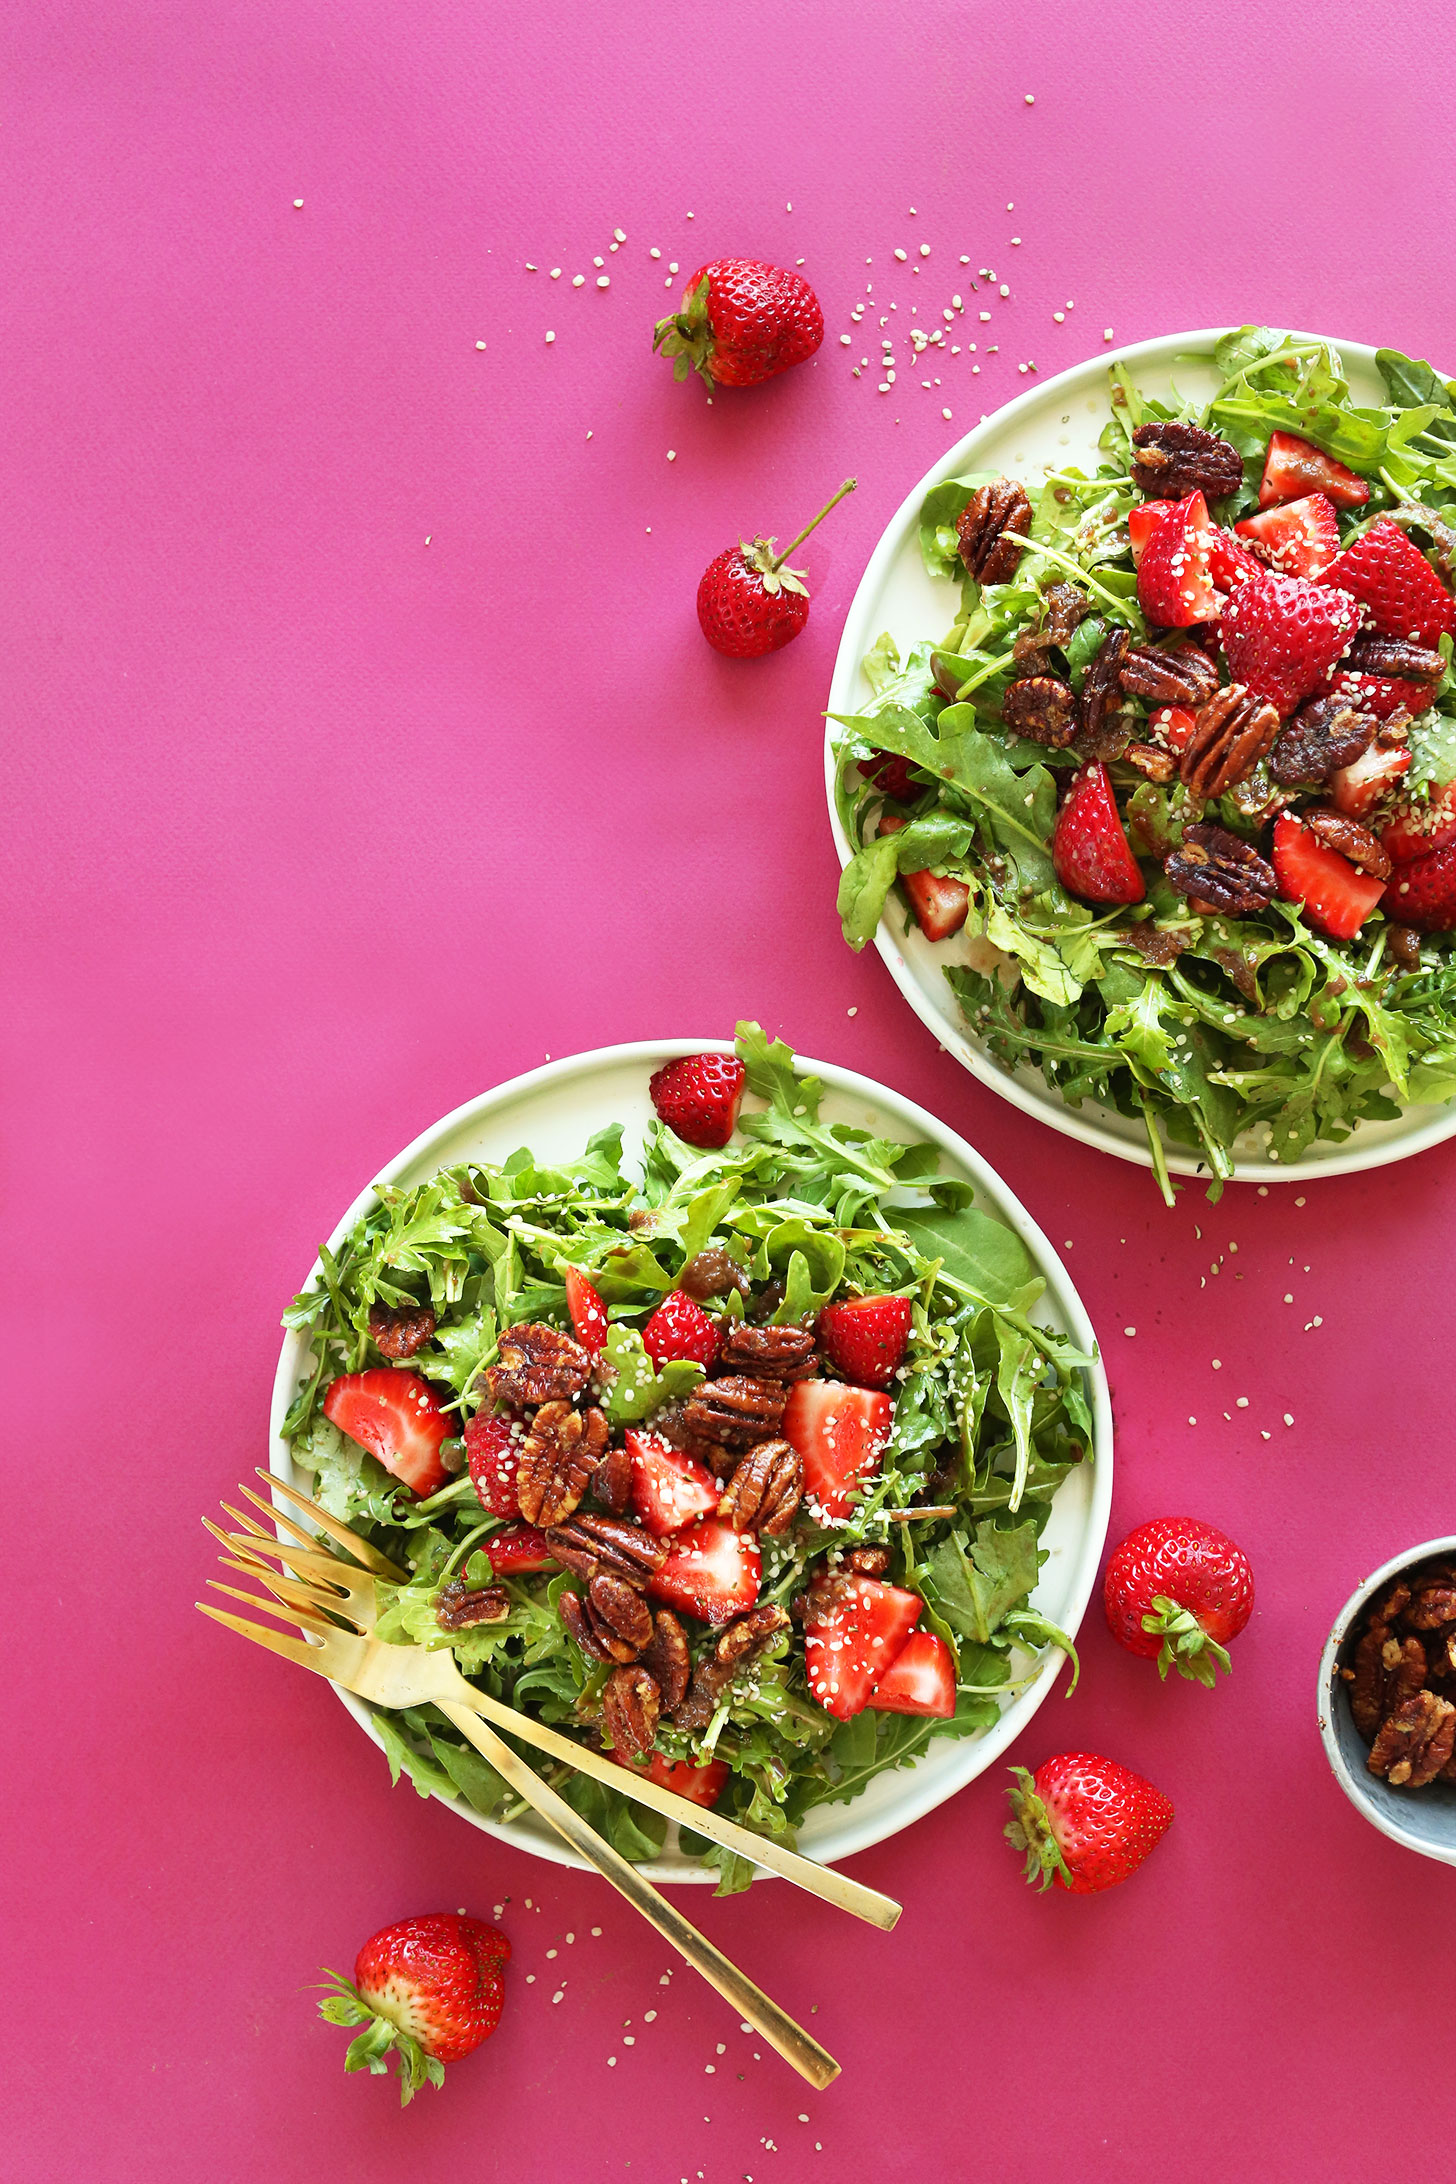 Dinner plates filled with our delicious recipe of Strawberry Arugula Salad with Hemp Seeds and Brown Sugar Pecans